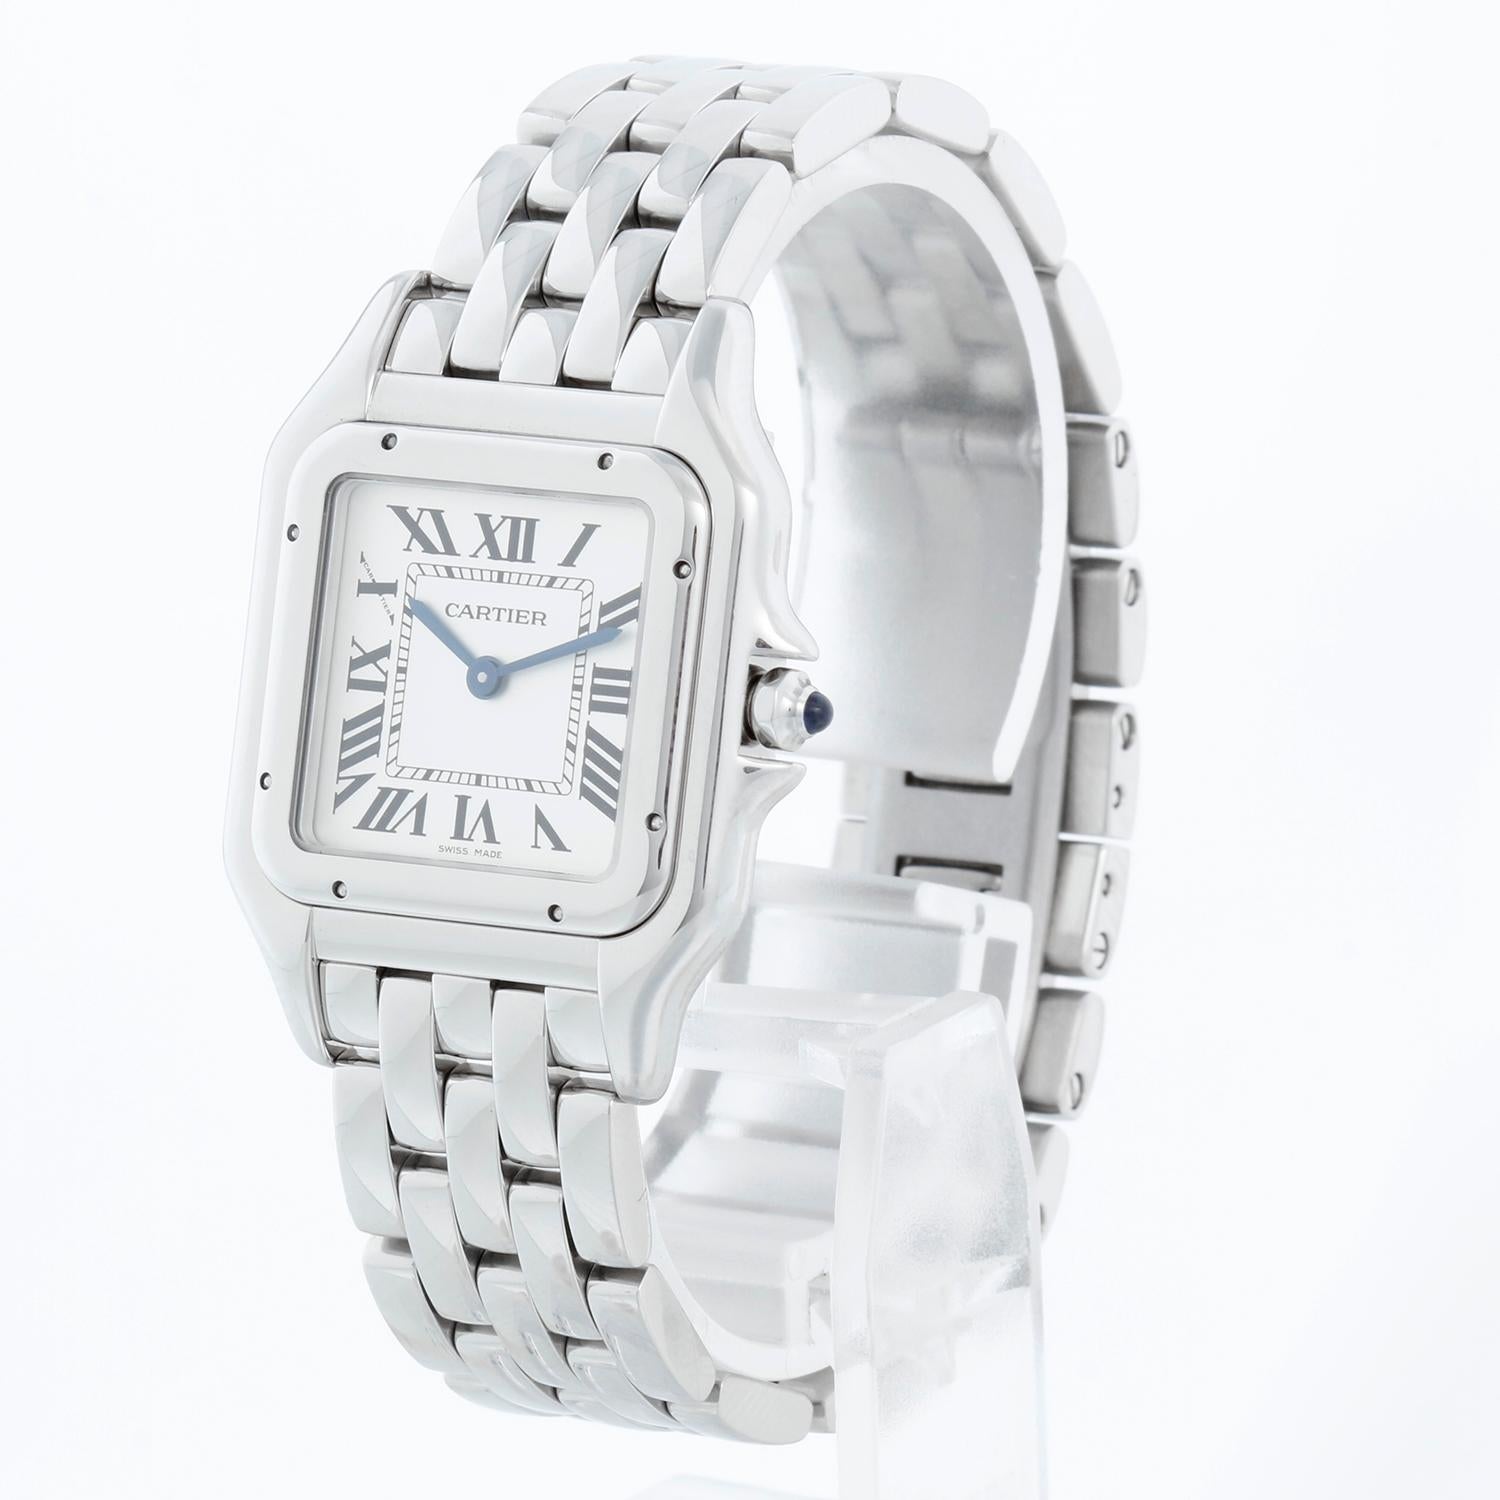 Cartier Stainless Steel  Midsize Panther WSPN0007 4016 - Quartz. Stainless Steel  ( 27 x 37 mm ). Silver dial with black roman numerals. Stainless steel bracelet; will fit up to a 6 1/4 inch wrist. Pre-owned with Cartier pouch and papers. Dated 2017.